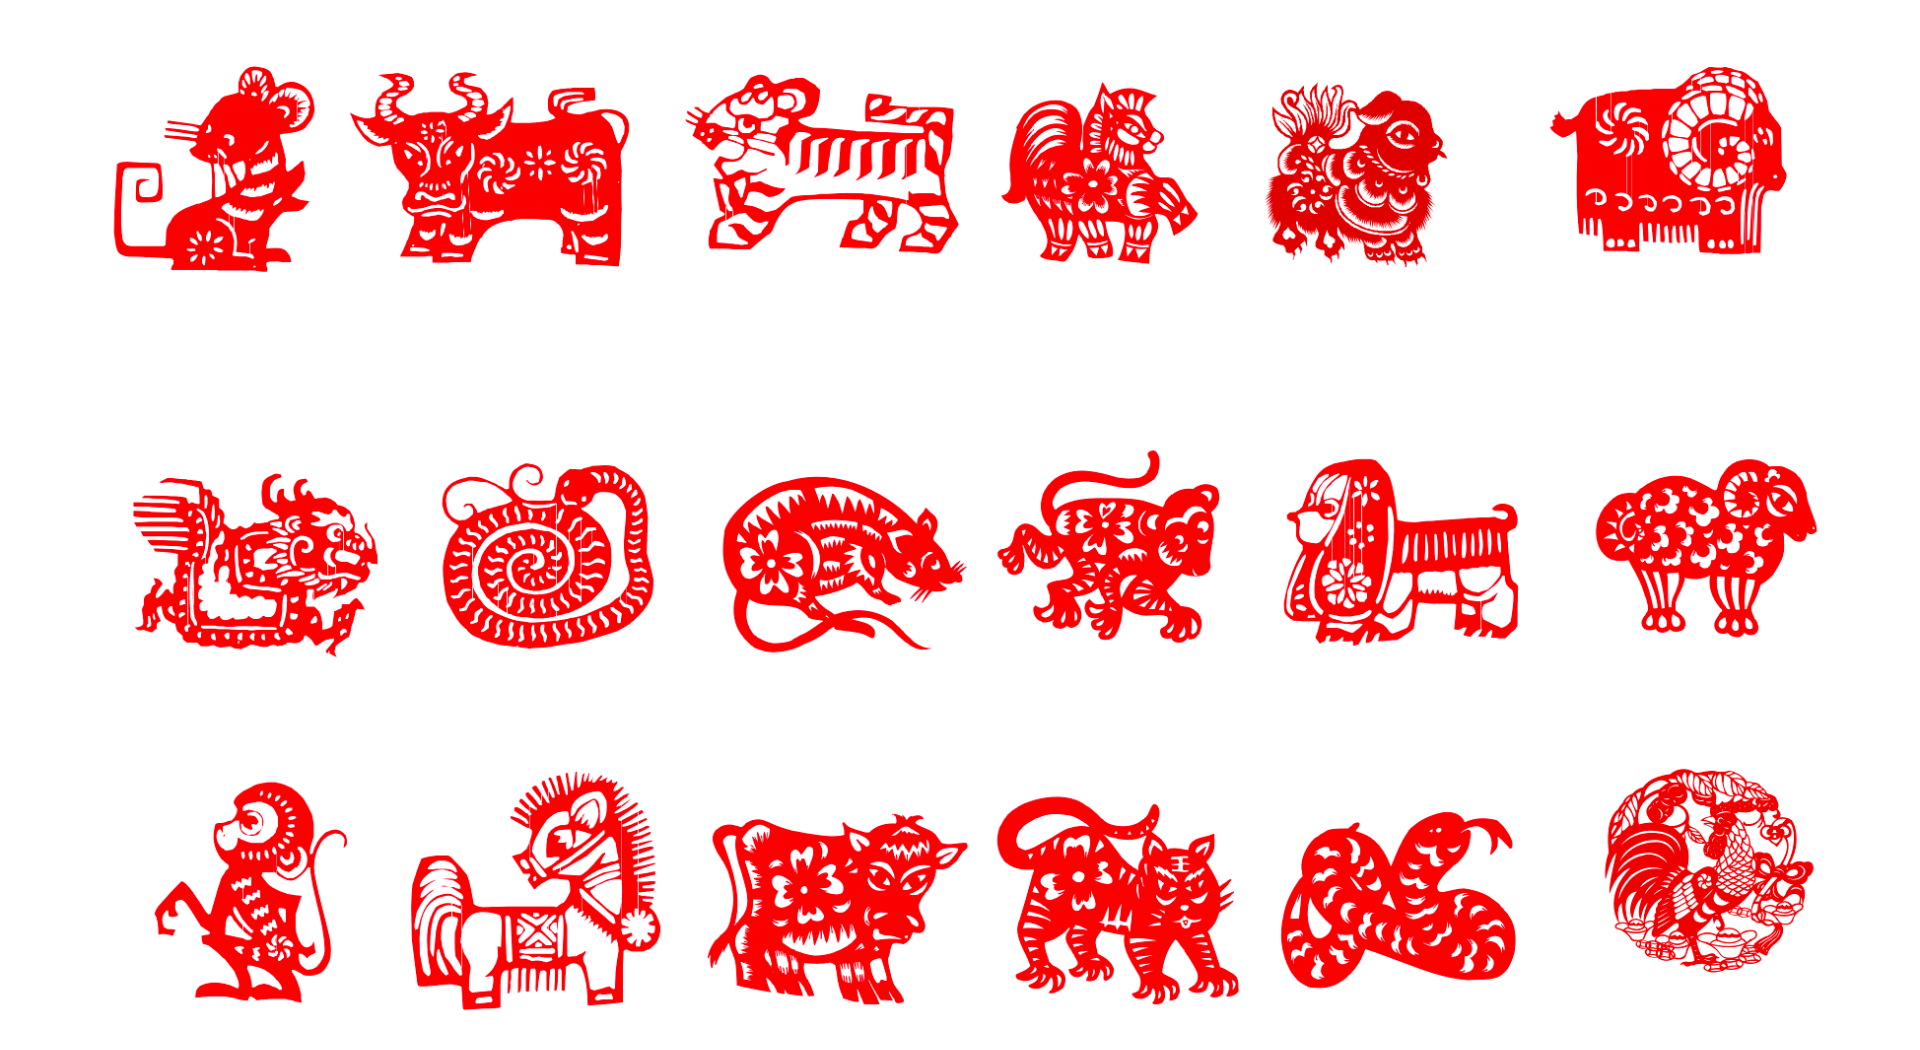 Chinese paper-cut style New Year PPT template free download